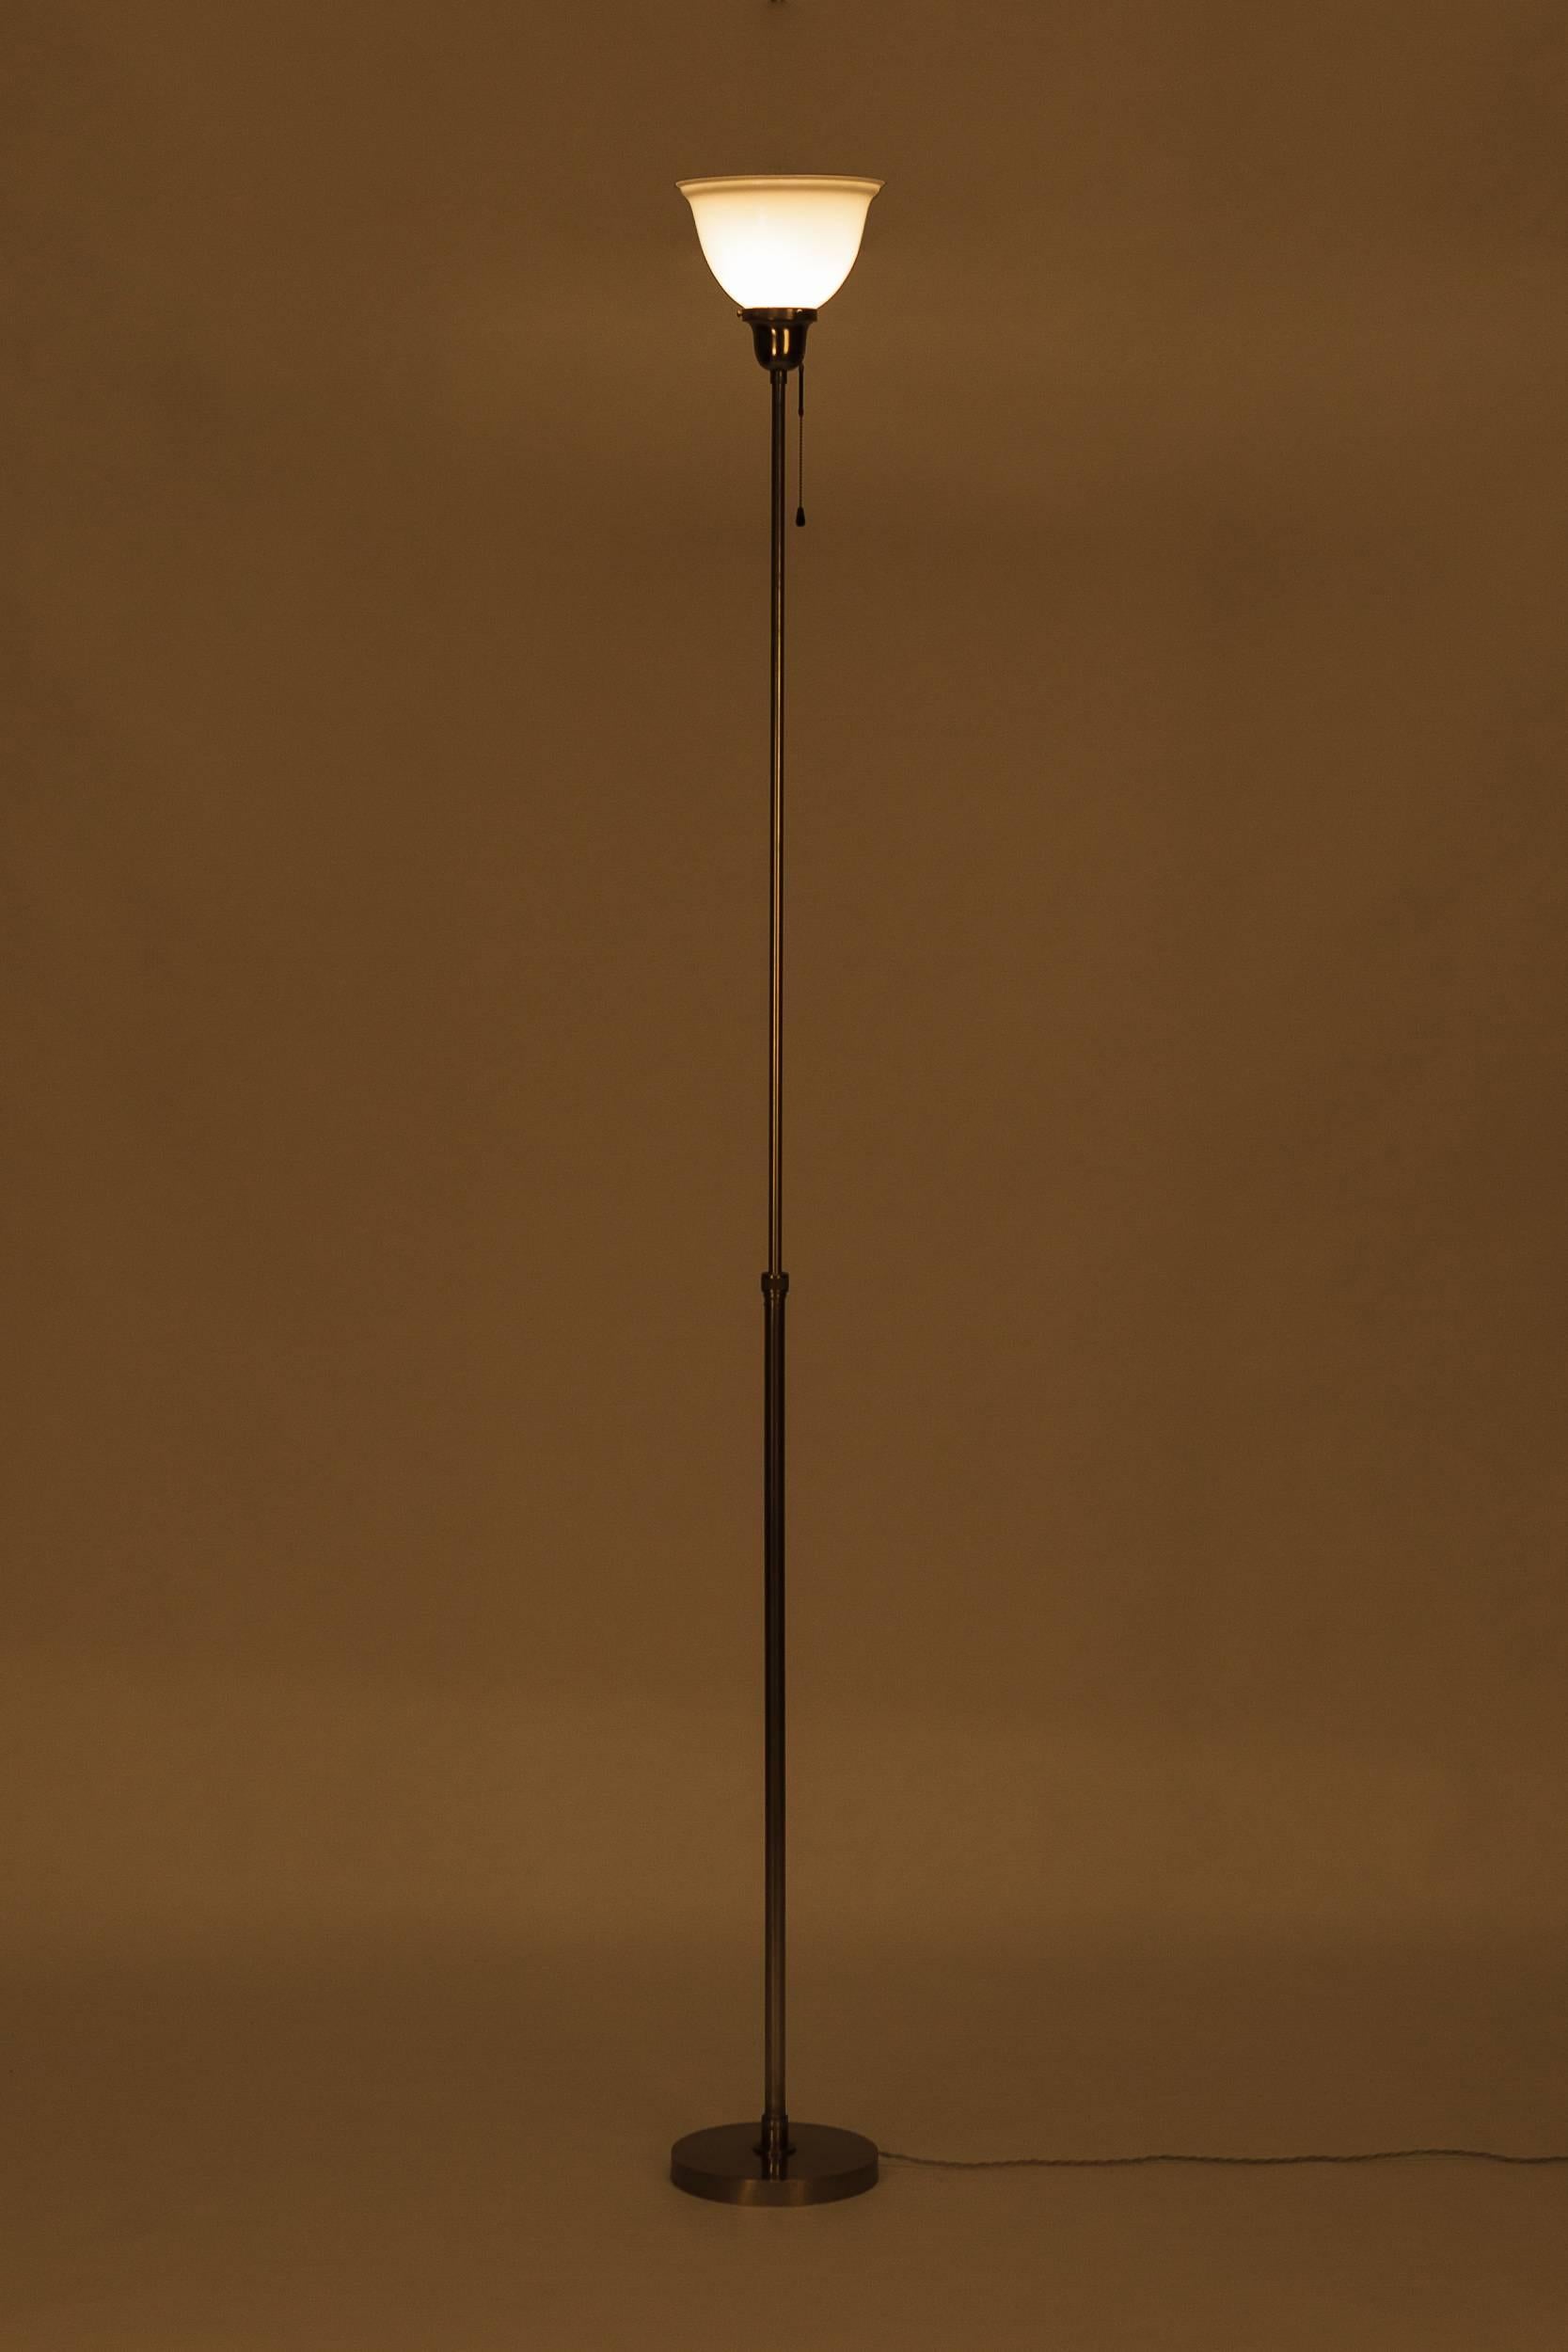 Floor lamp model 48.810 manufactured by BAG Turgi in Switzerland in the 1930s. Completely made of nickel-plated metal, telescopic stem, with opaline glass chalice providing a beautiful indirect light. Pull switch and very long wire.

Height